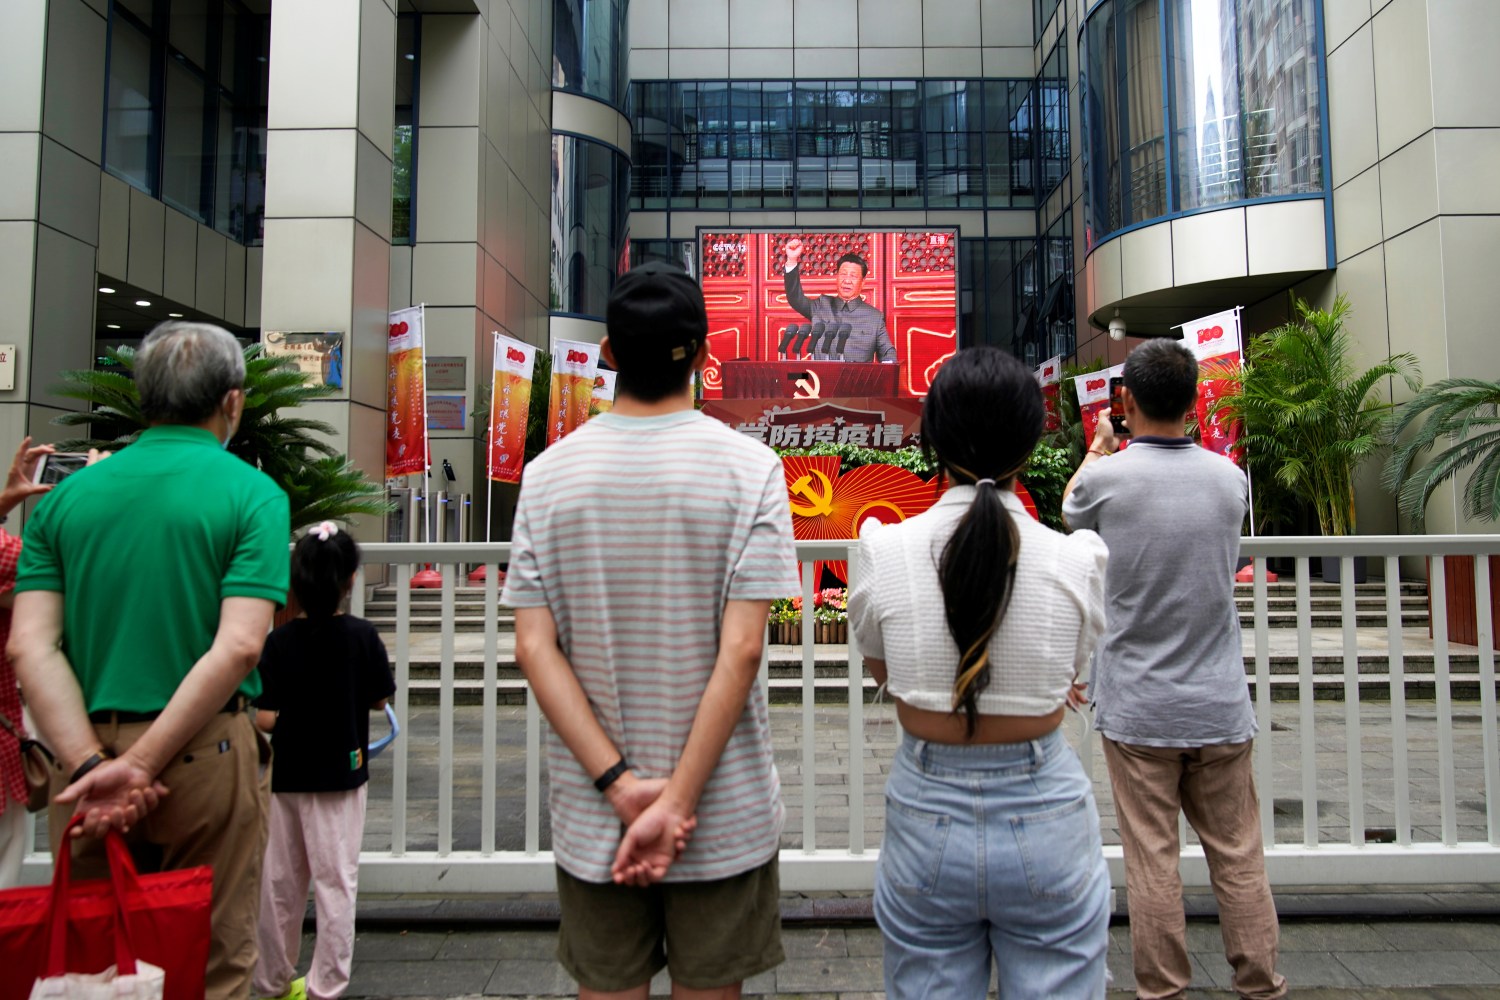 People watch a giant screen broadcasting Chinese President Xi Jinping's speech at a celebration marking the 100th founding anniversary of the Communist Party of China, in Shanghai July 1, 2021. REUTERS/Aly Song